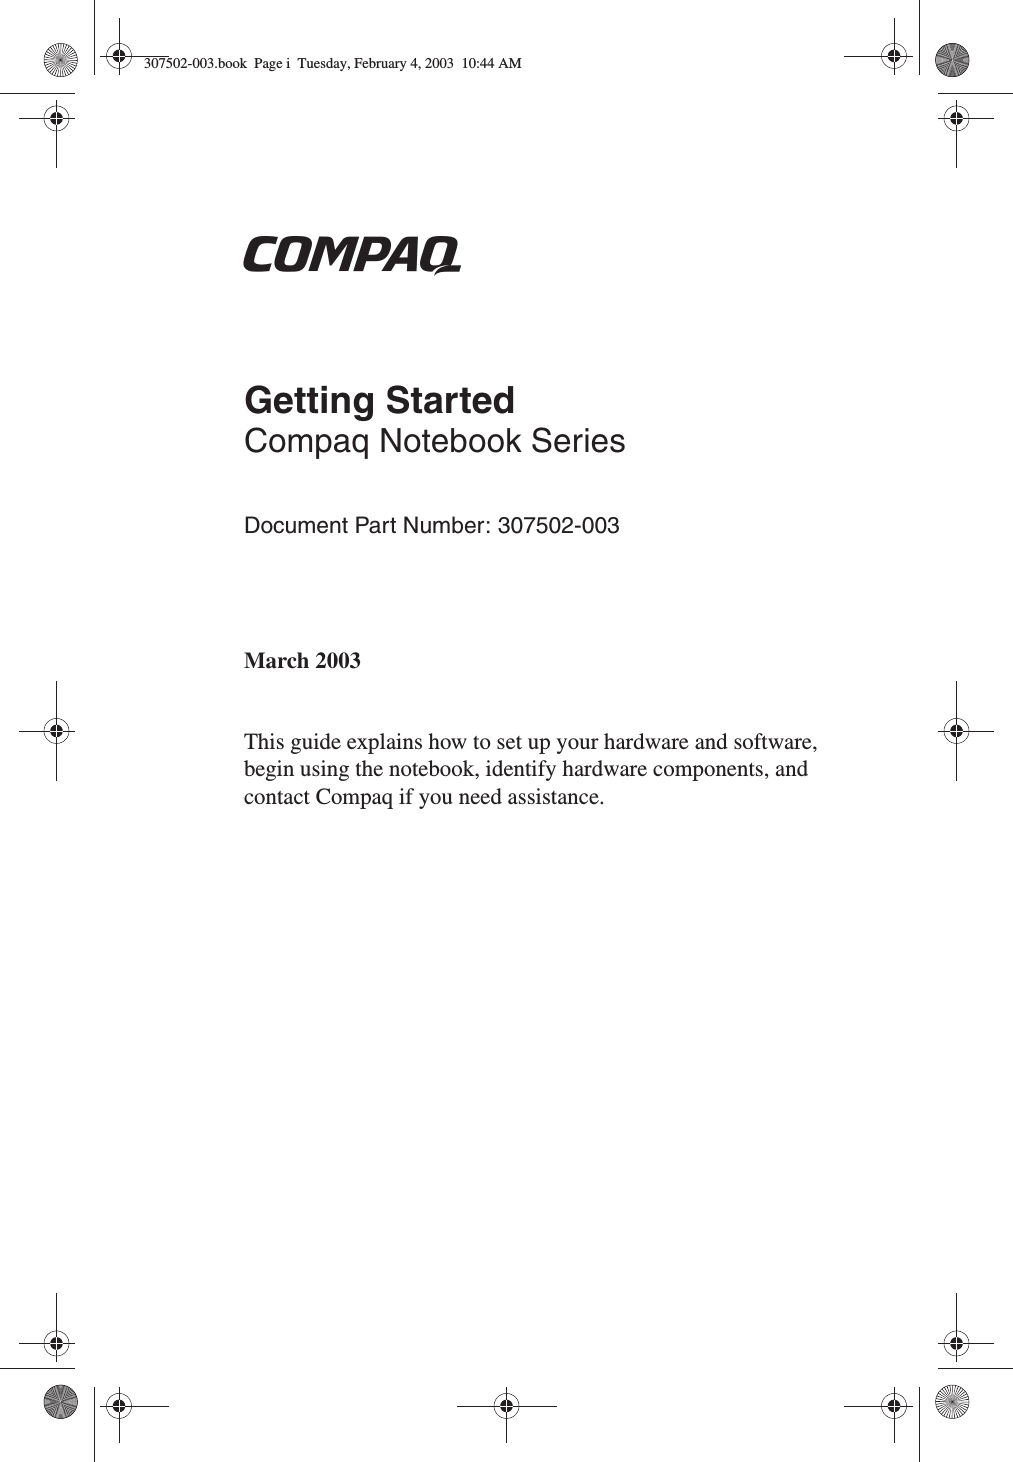 bGetting StartedCompaq Notebook SeriesDocument Part Number: 307502-003March 2003This guide explains how to set up your hardware and software, begin using the notebook, identify hardware components, and contact Compaq if you need assistance.307502-003.book  Page i  Tuesday, February 4, 2003  10:44 AM